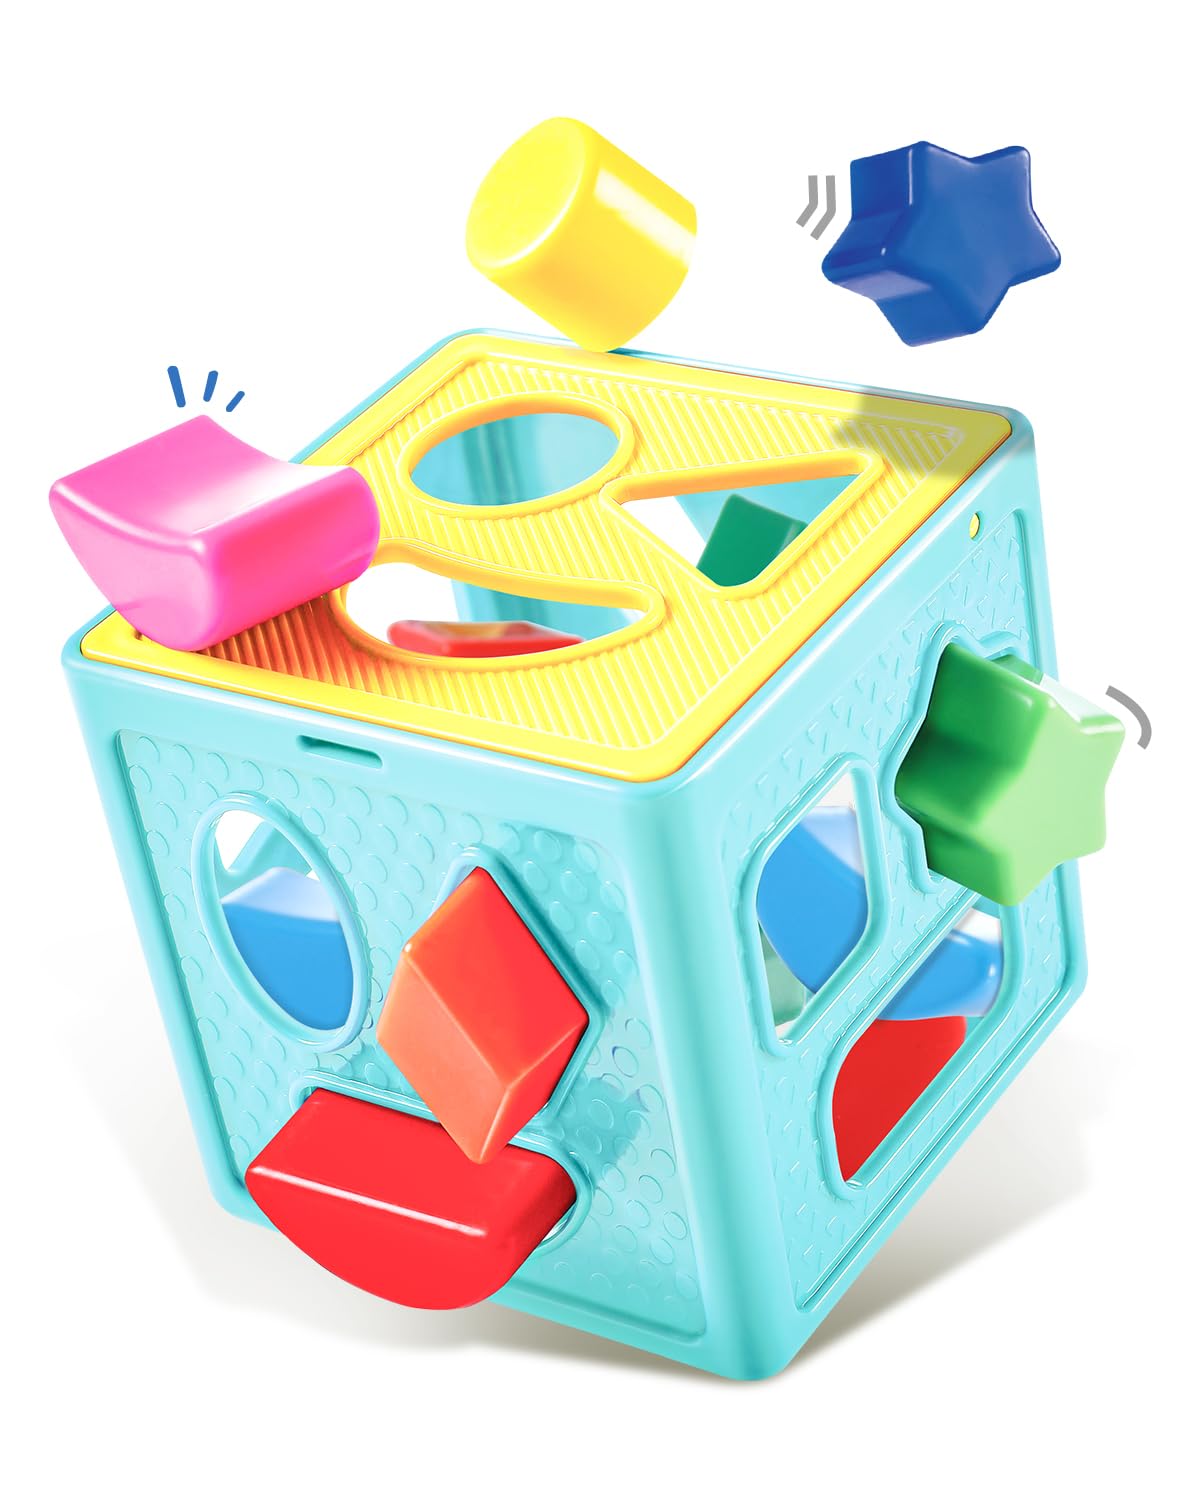 Intellibaby Premium Shape Sorter Cube|Learning & Educational Shape Sorter for Kids|Recognition Game|Sorting & Stacking Toys for Toddlers and Preschoolers|BIS Certified|Baby Gift for Toddlers